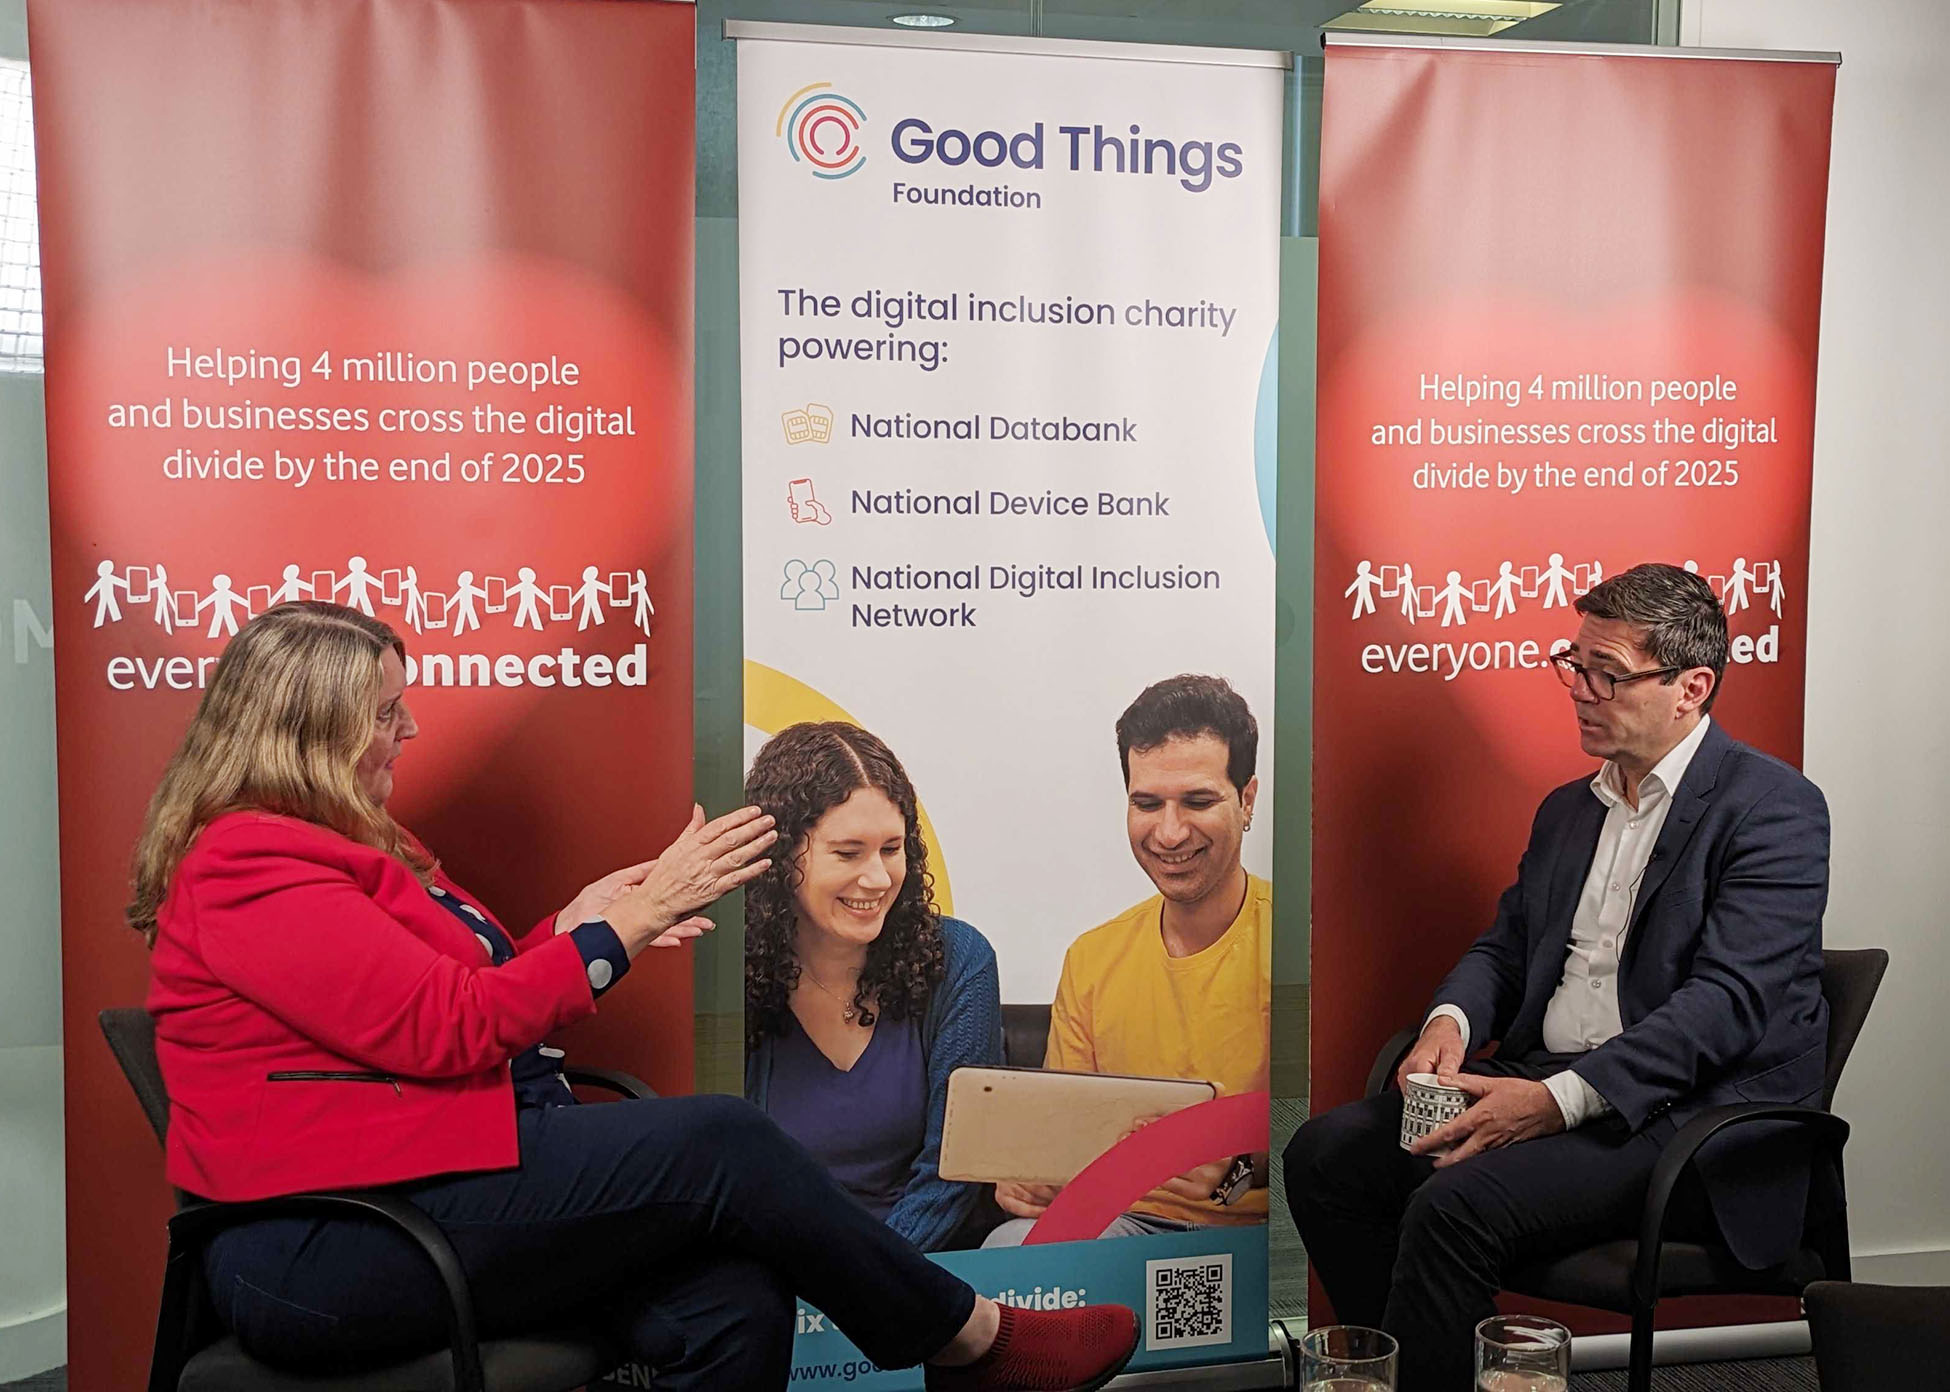 Helen Milner OBE, CEO of Good Things, is in a fireside chat conversation with Greater Manchester Mayor Andy Burnham. They're sat in front of a large banner that says Good Things Foundation, the digital inclusion charity powering the National Databank, National Device Bank and National Digital Inclusion Network.